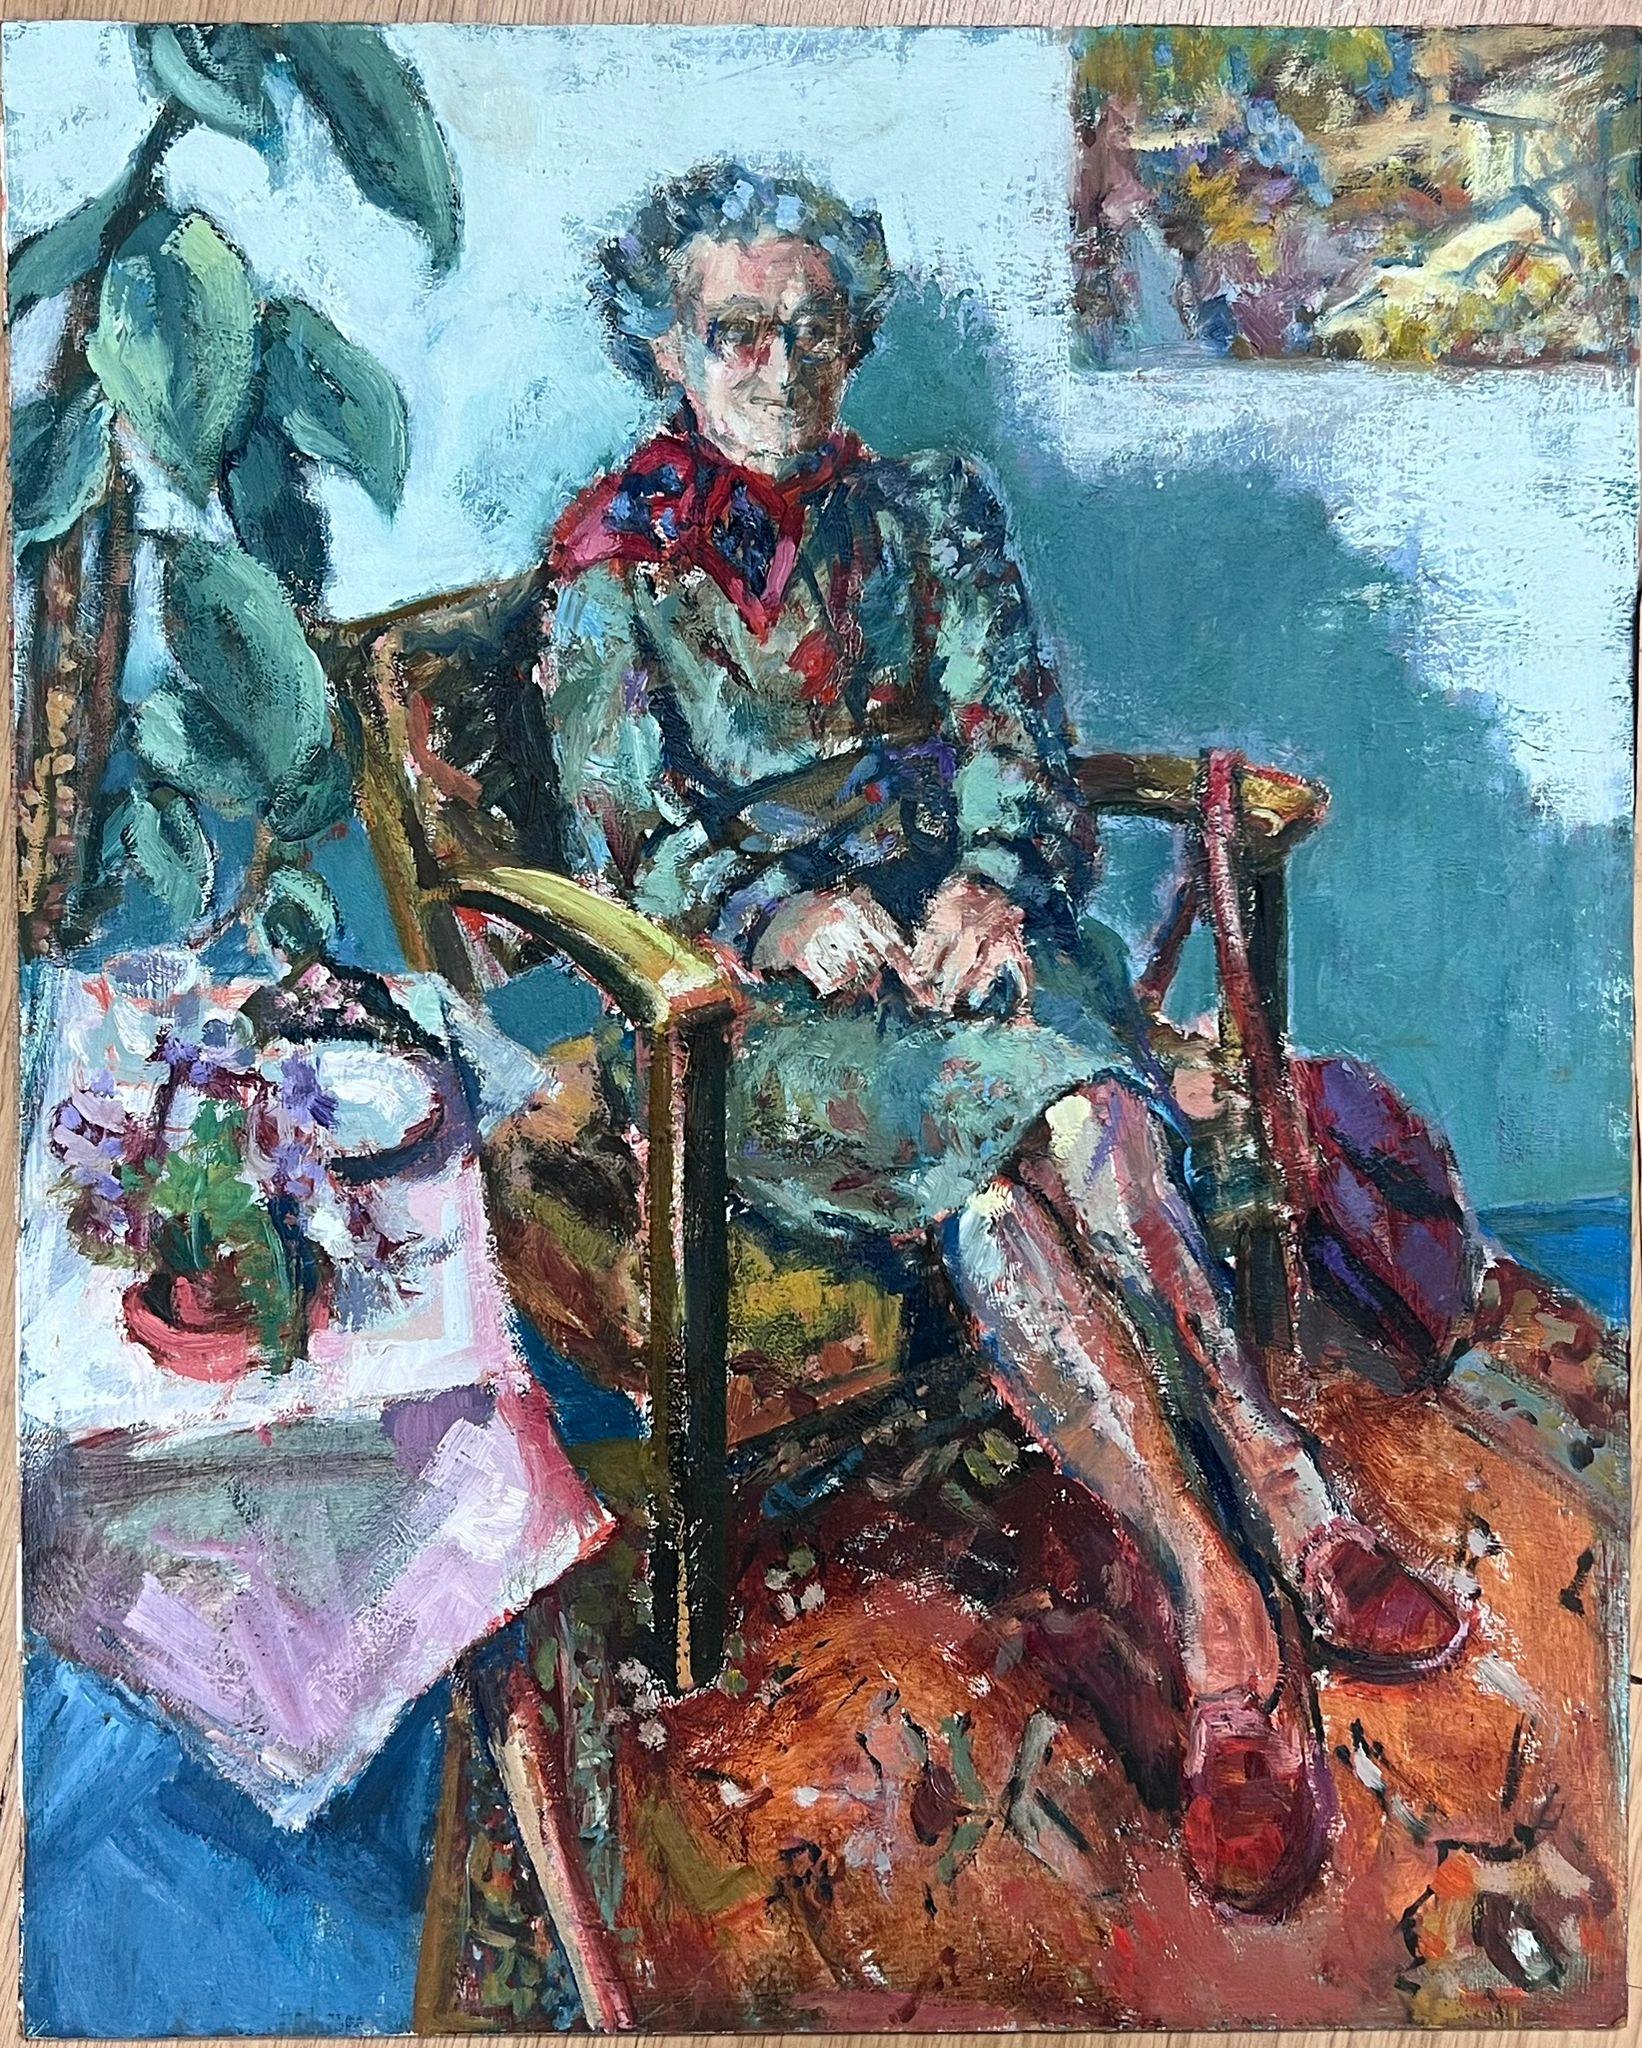 English Impressionist Oil Painting Elderly Lady Sat On Chair In Bright Room - Gray Figurative Painting by Helen Greenfield